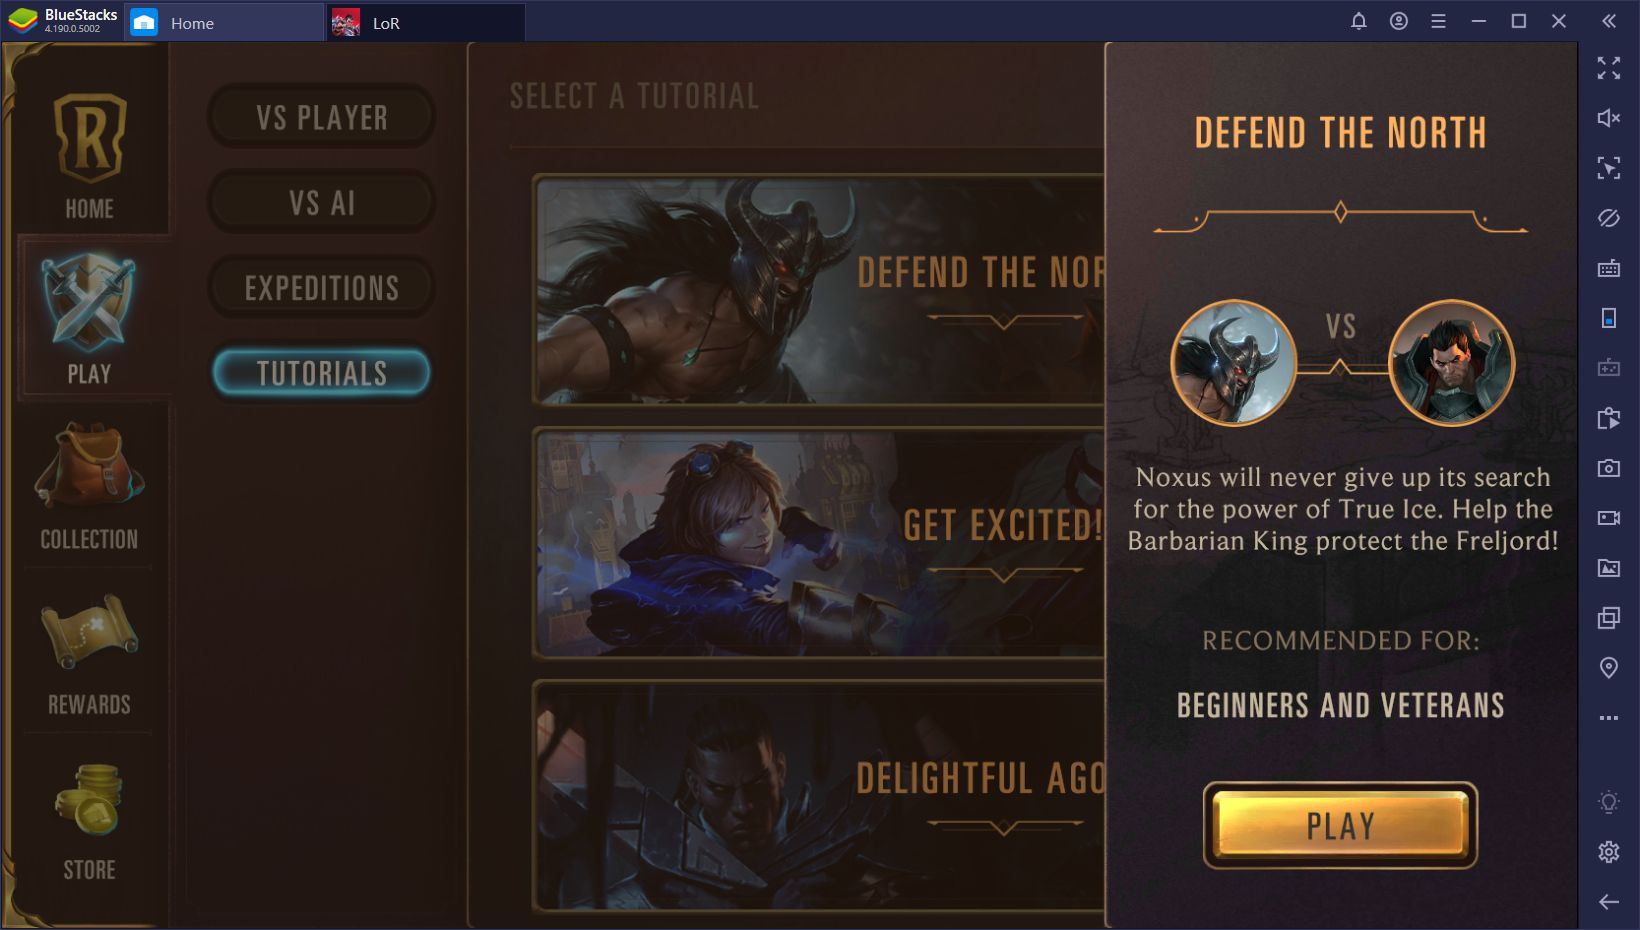 Riot Games’ Legends of Runeterra: How to Get Started?